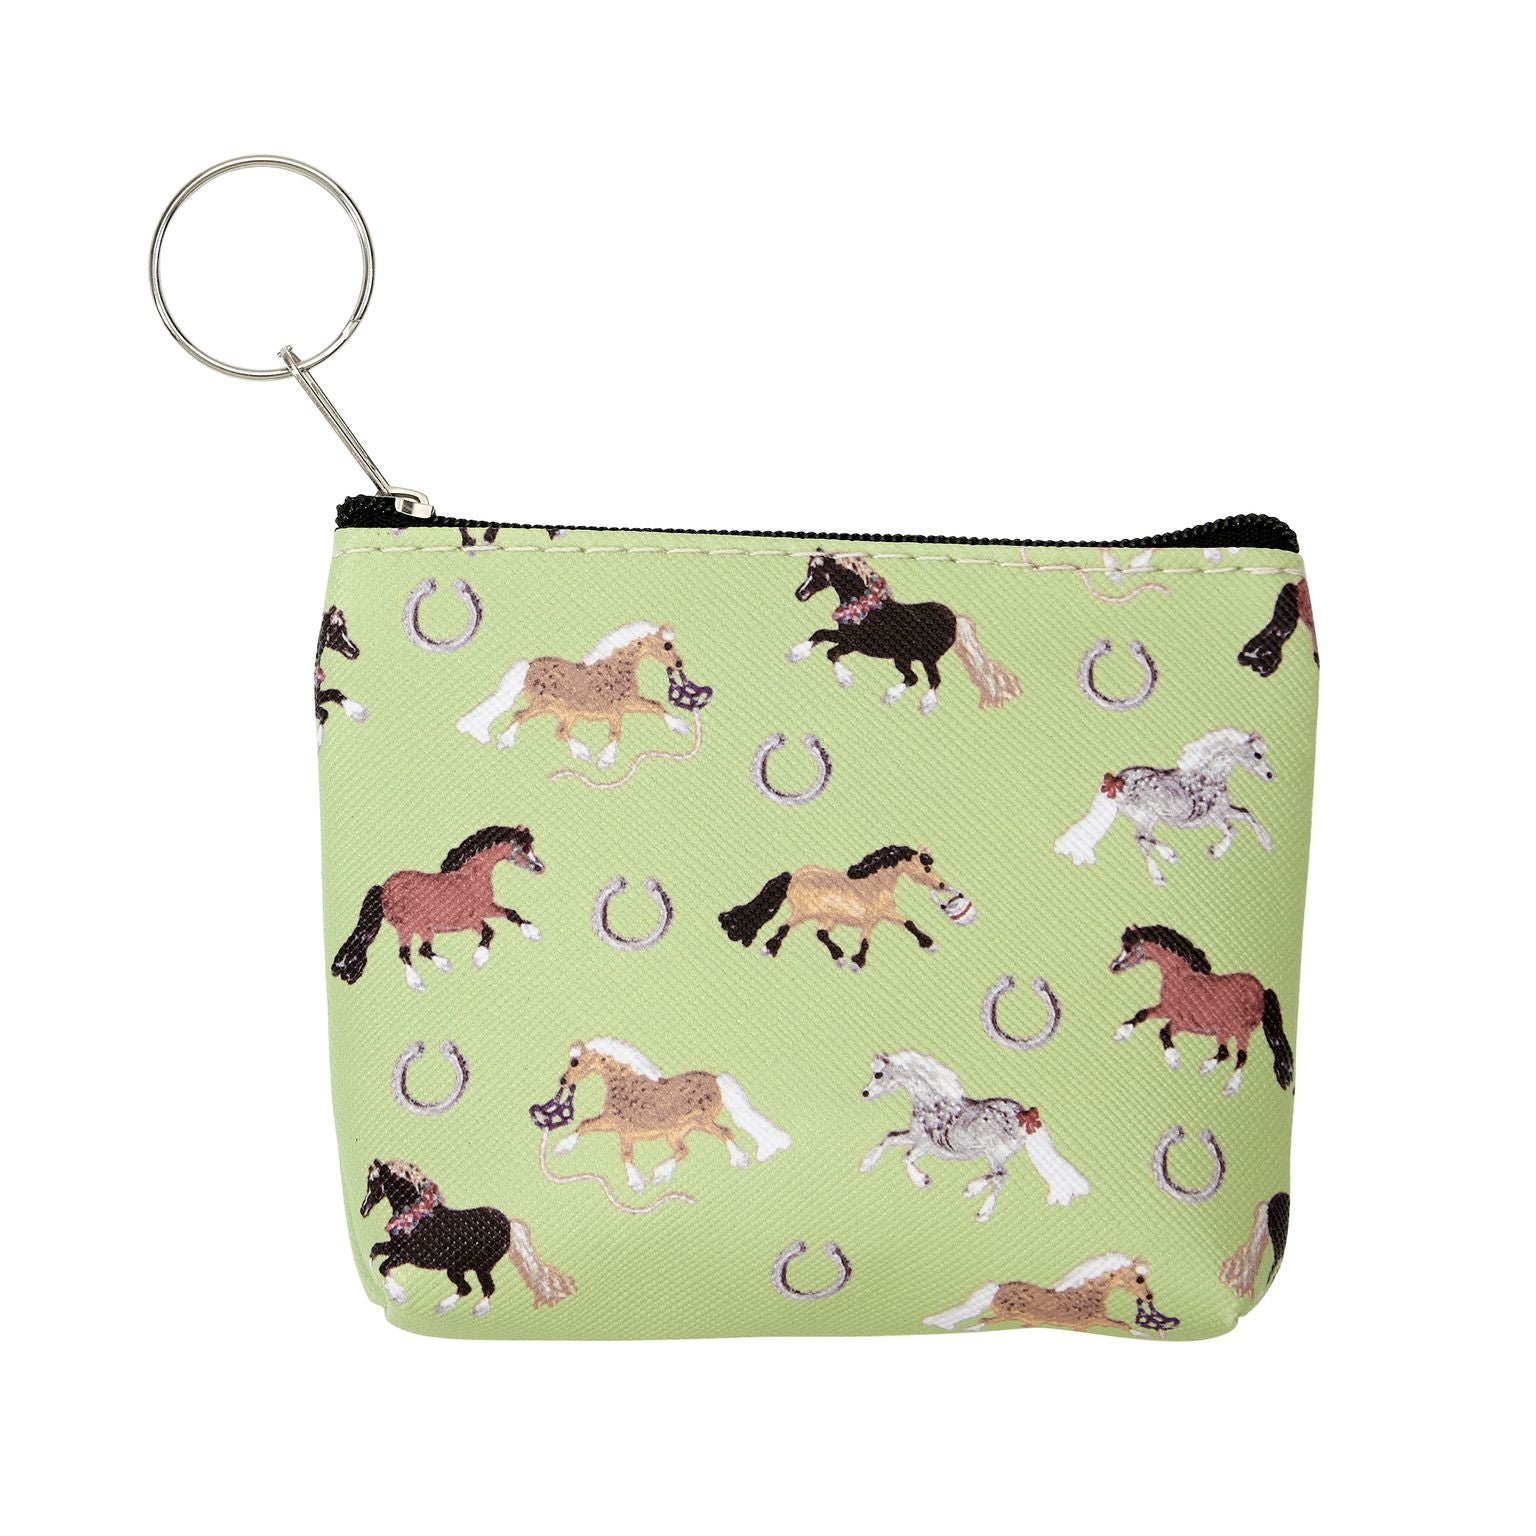 AWST Coin Purses with Frolicking Ponies